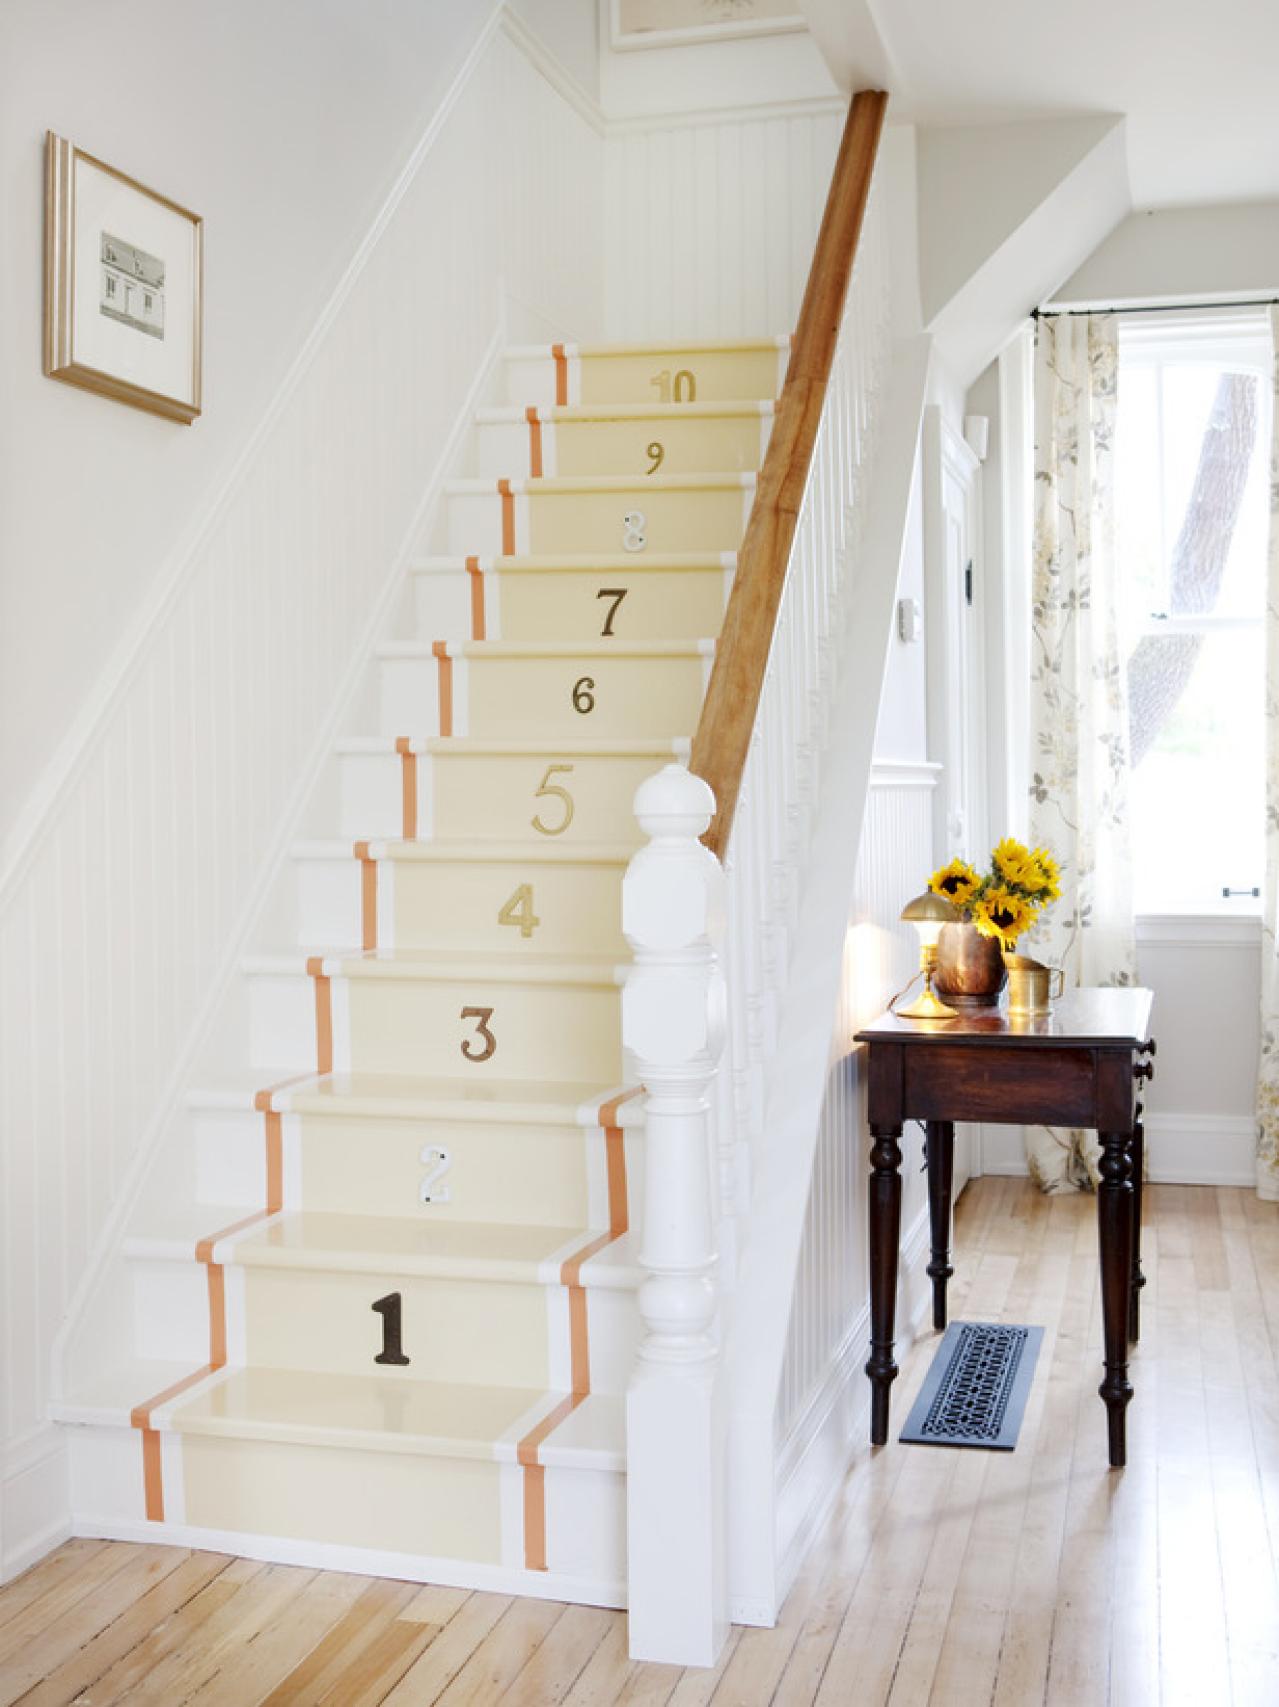 42 Under Stairs Storage Ideas For Small Spaces Making Your ...